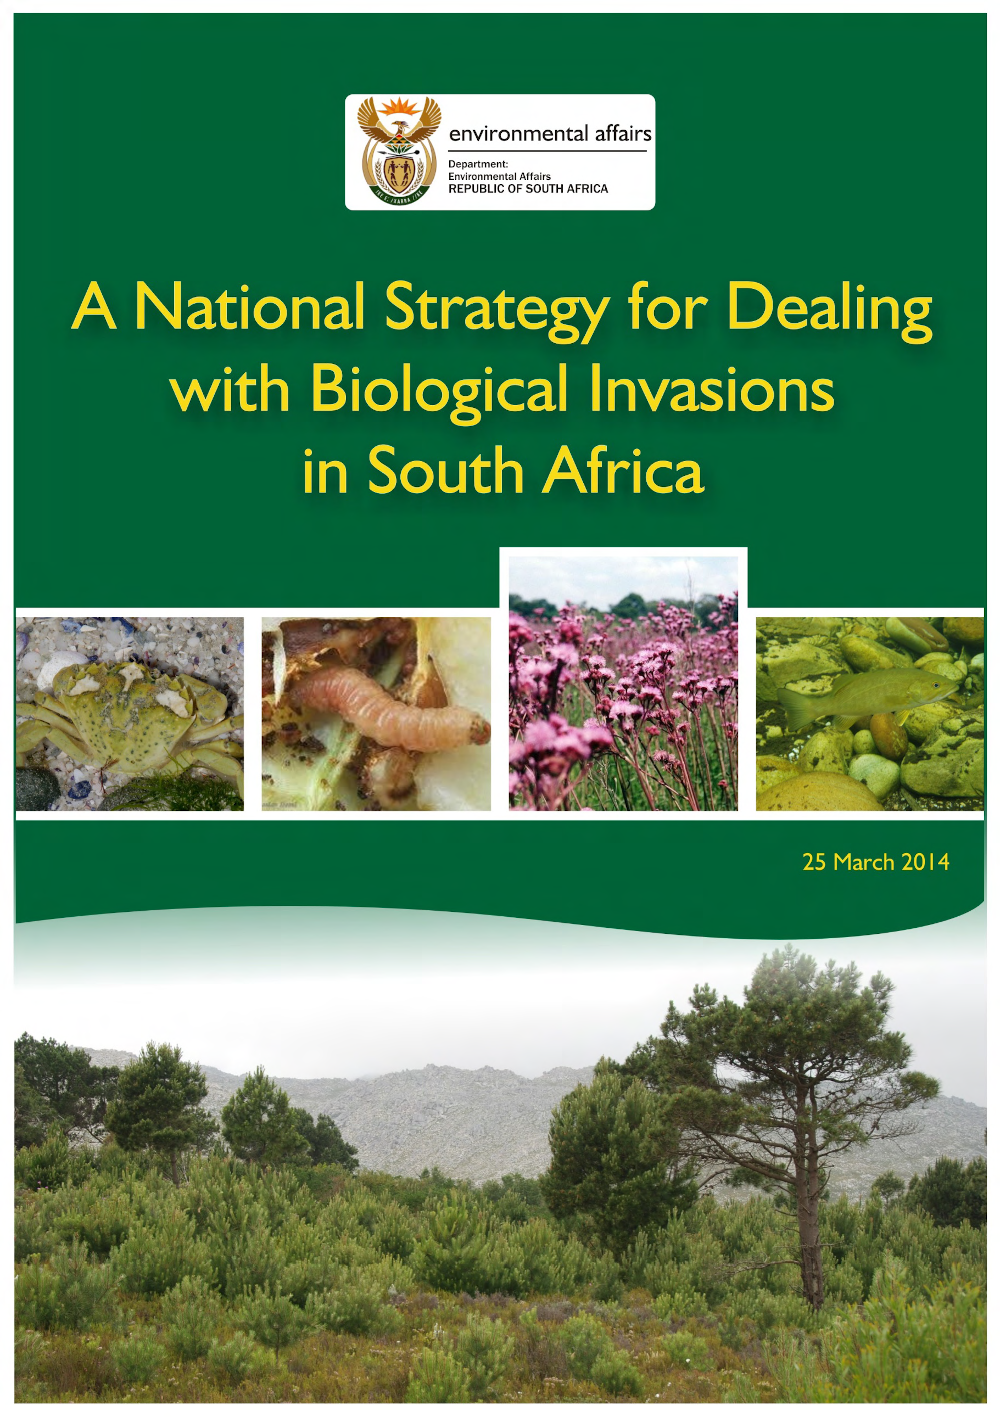 South Africa's National Strategy for Biological Invasions